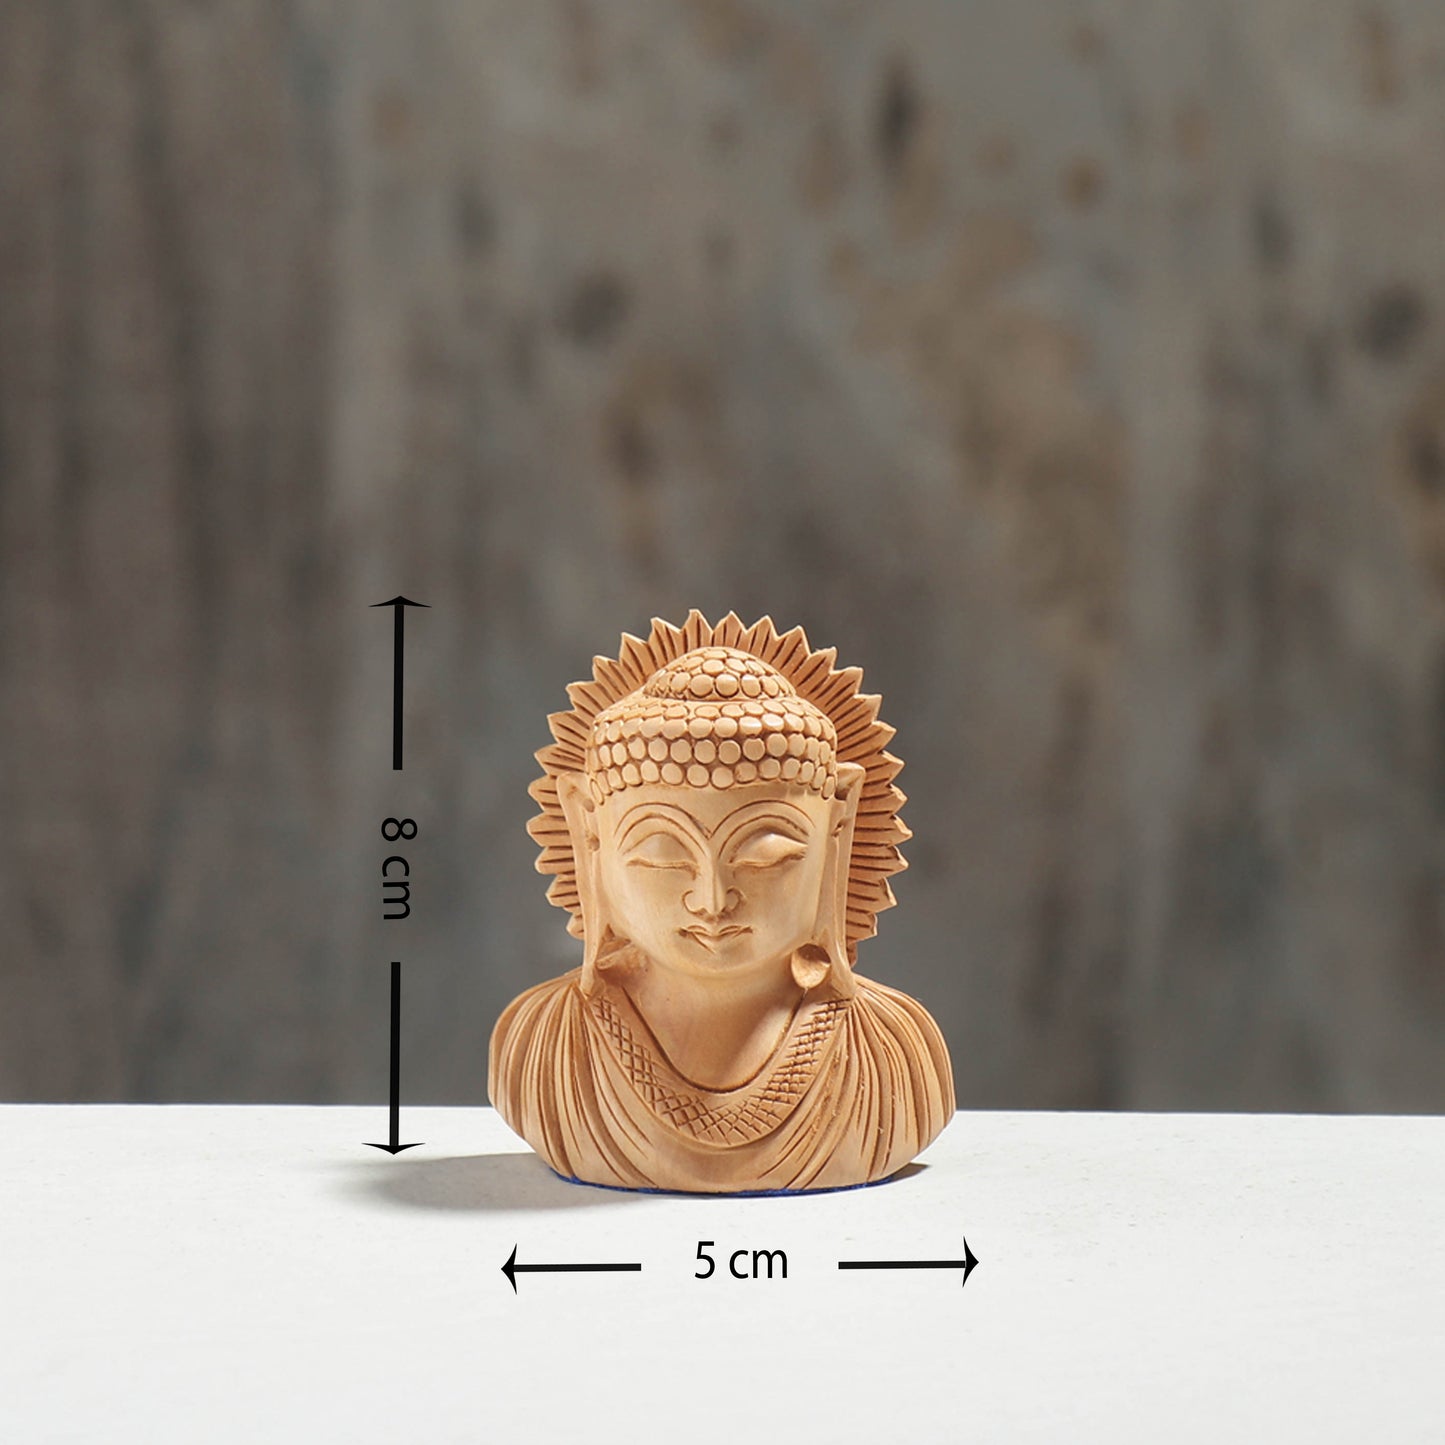 Lord Buddha - Hand Carved Kadam Wood Sculpture (3 in)